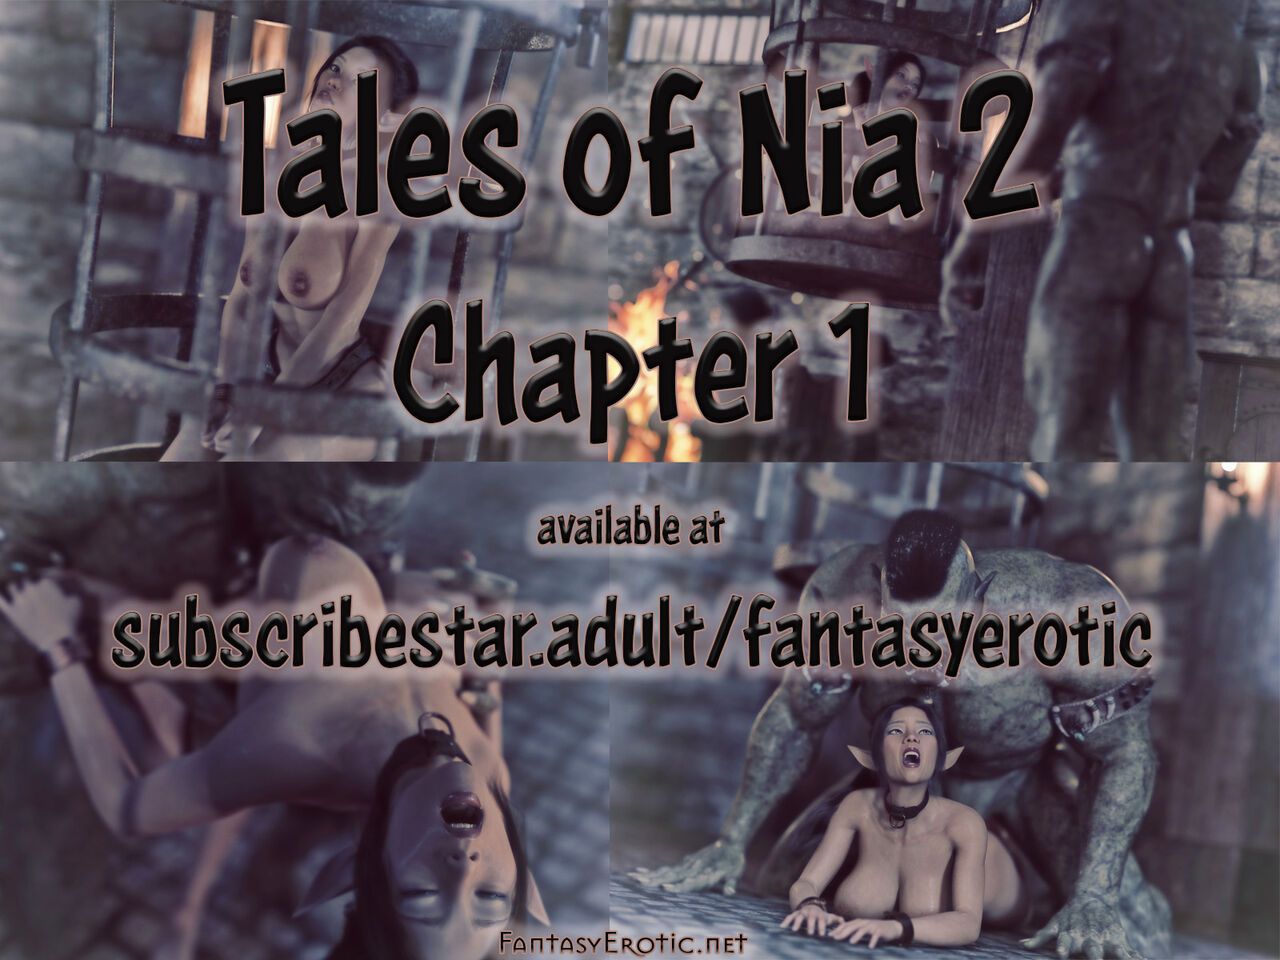 [Dionysos] [3D] Tales of Nia 2 - Chapter 1 1